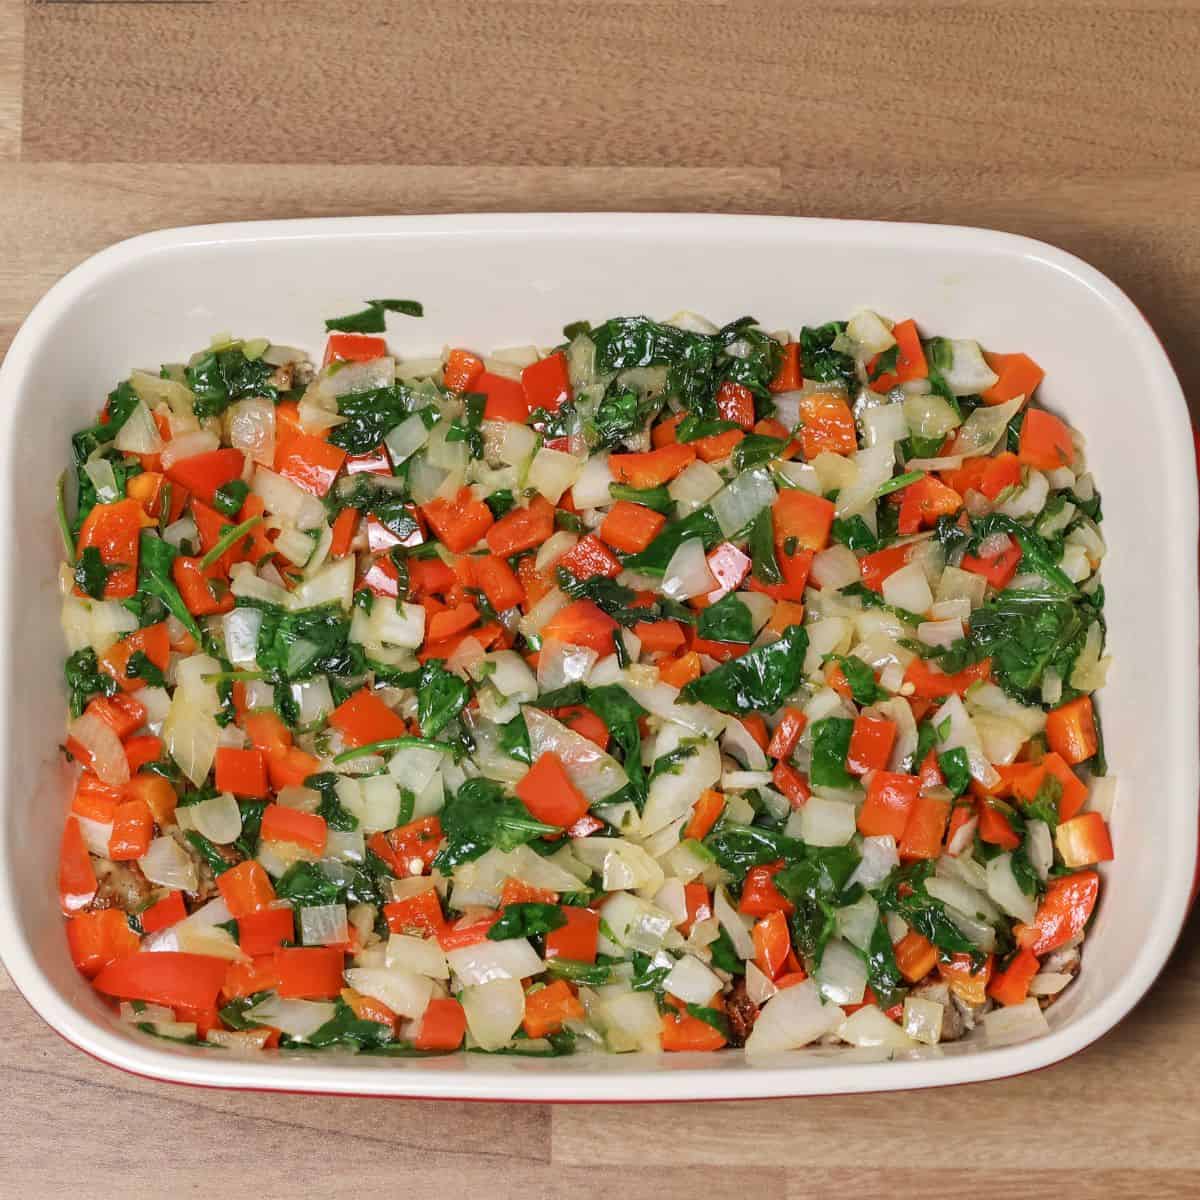 Chopped vegetables including red bell peppers, onions, and spinach layered on top of the meat in a white ceramic baking dish, prepped for a keto breakfast casserole.